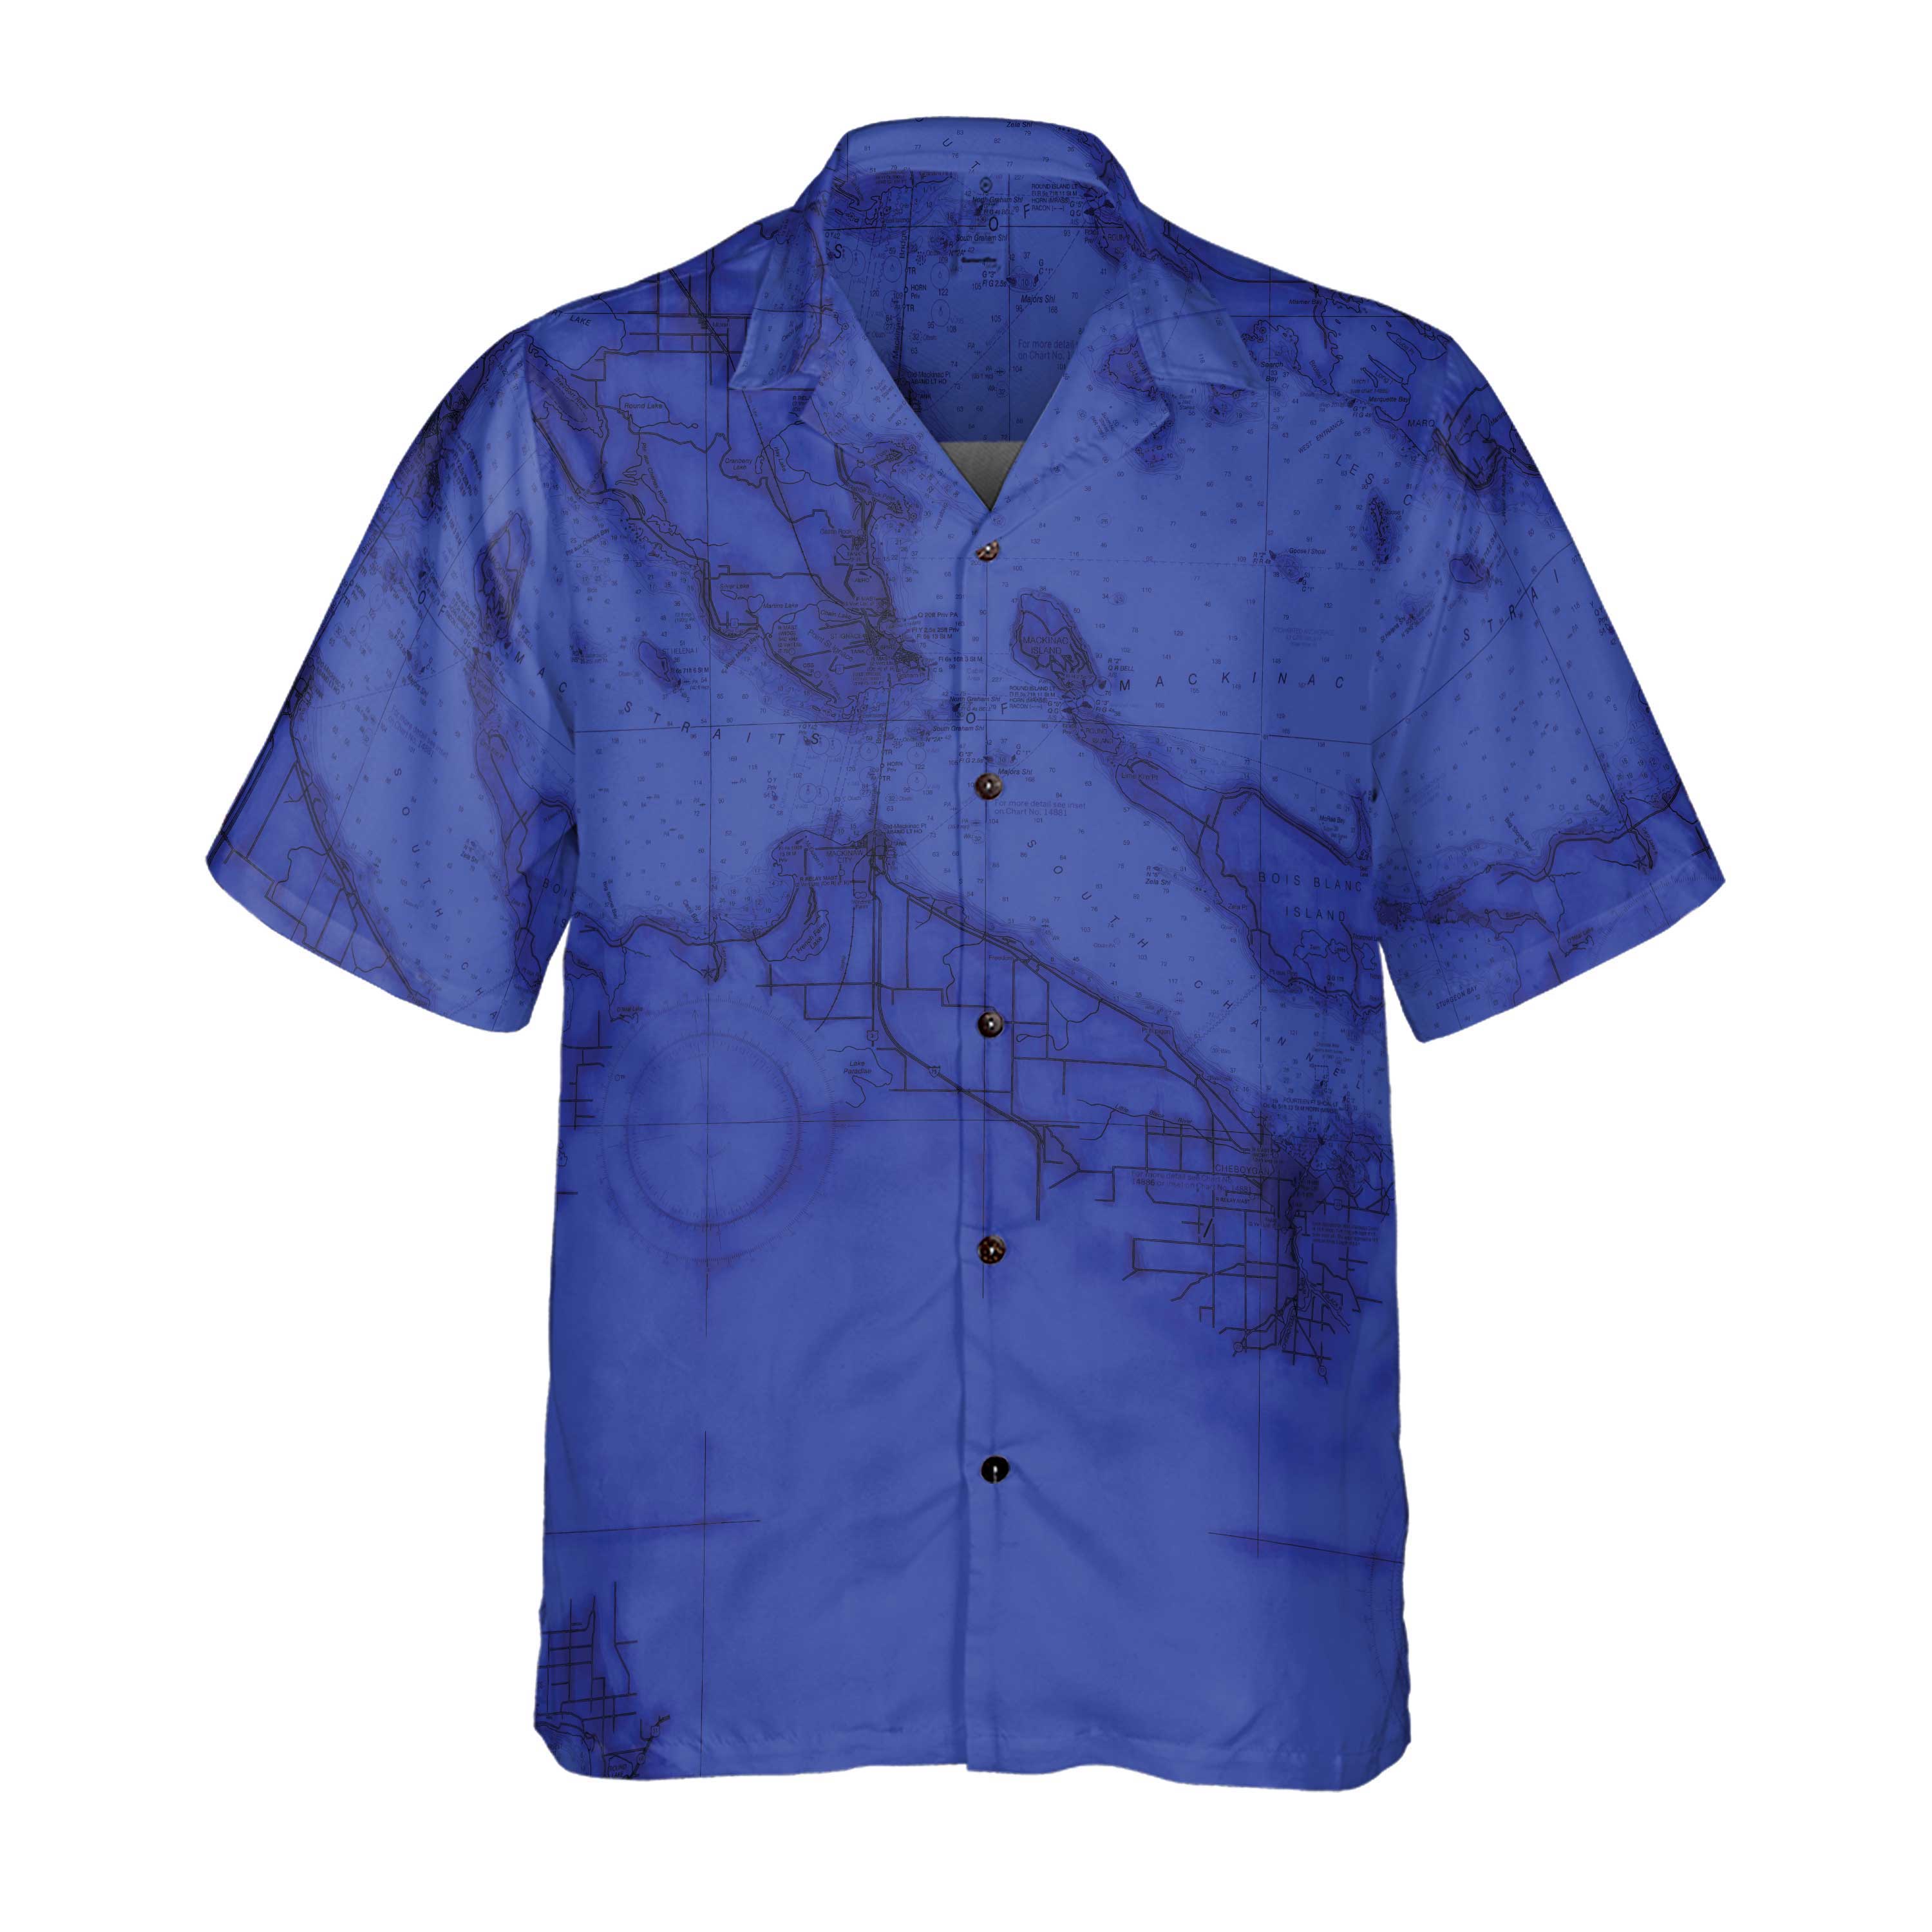 The Straits of Mackinac Coconut Button Camp Shirt